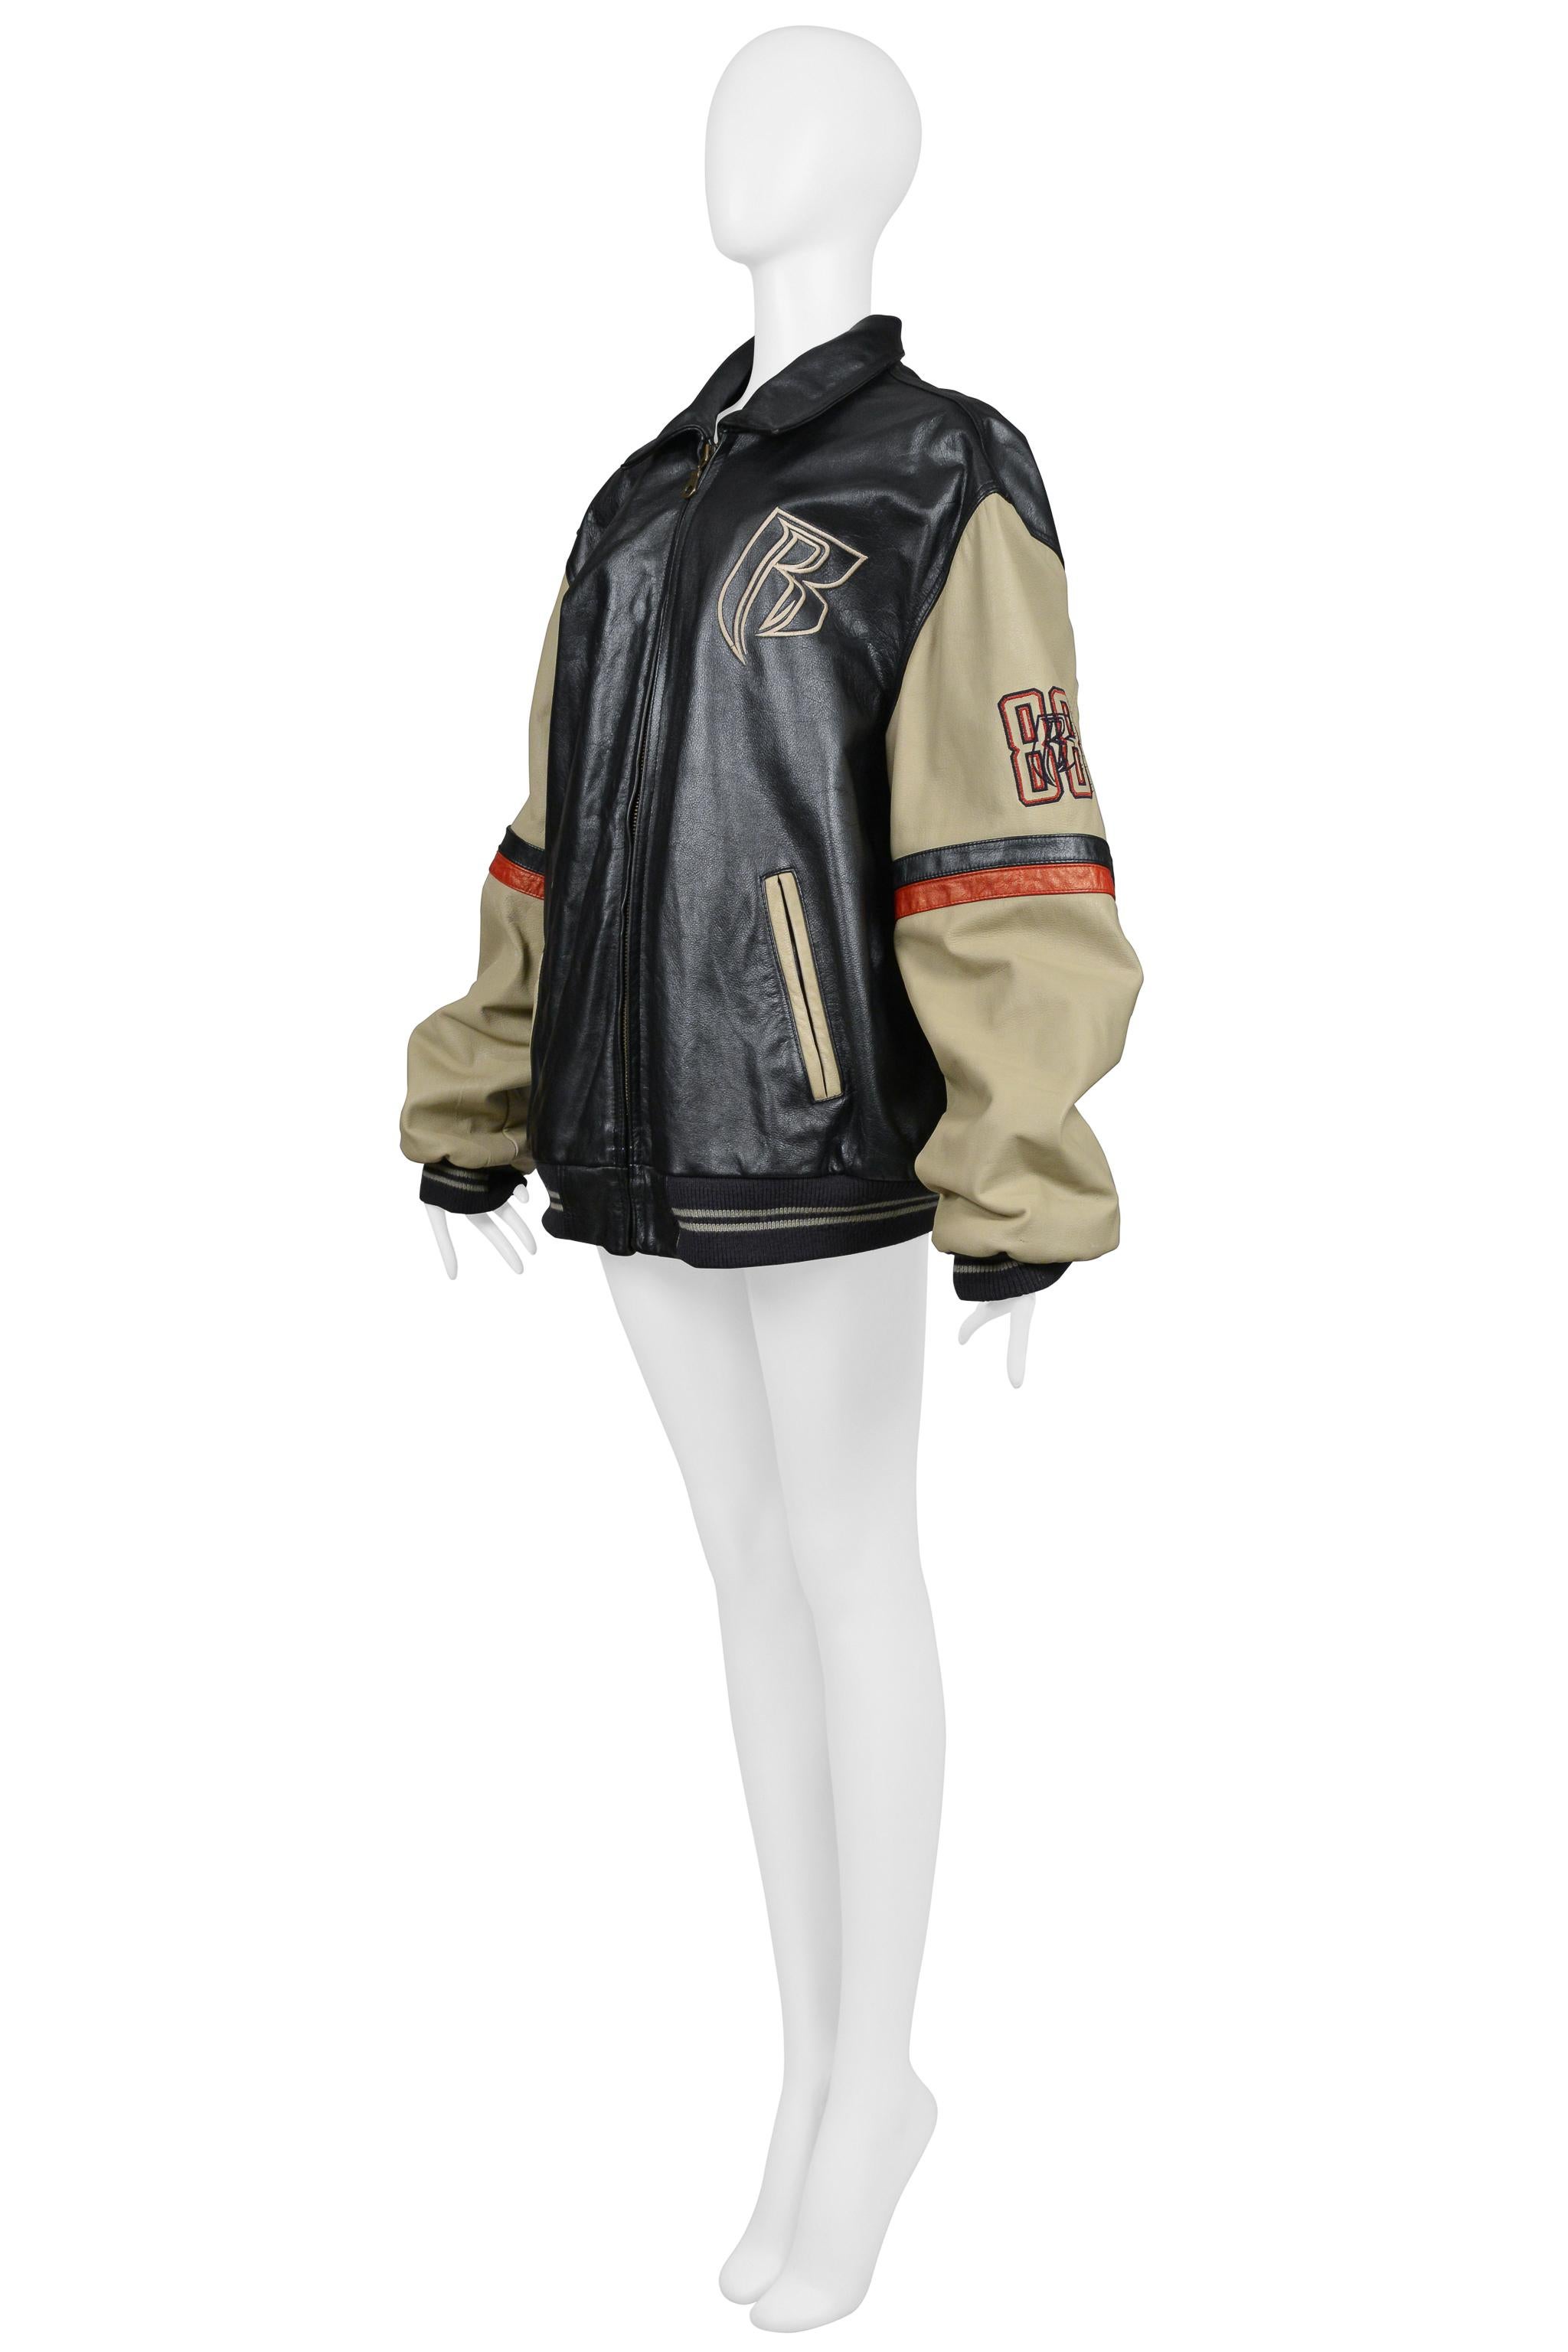 Ruff Ryders Unisex Leather Bomber Jacket For Sale 3